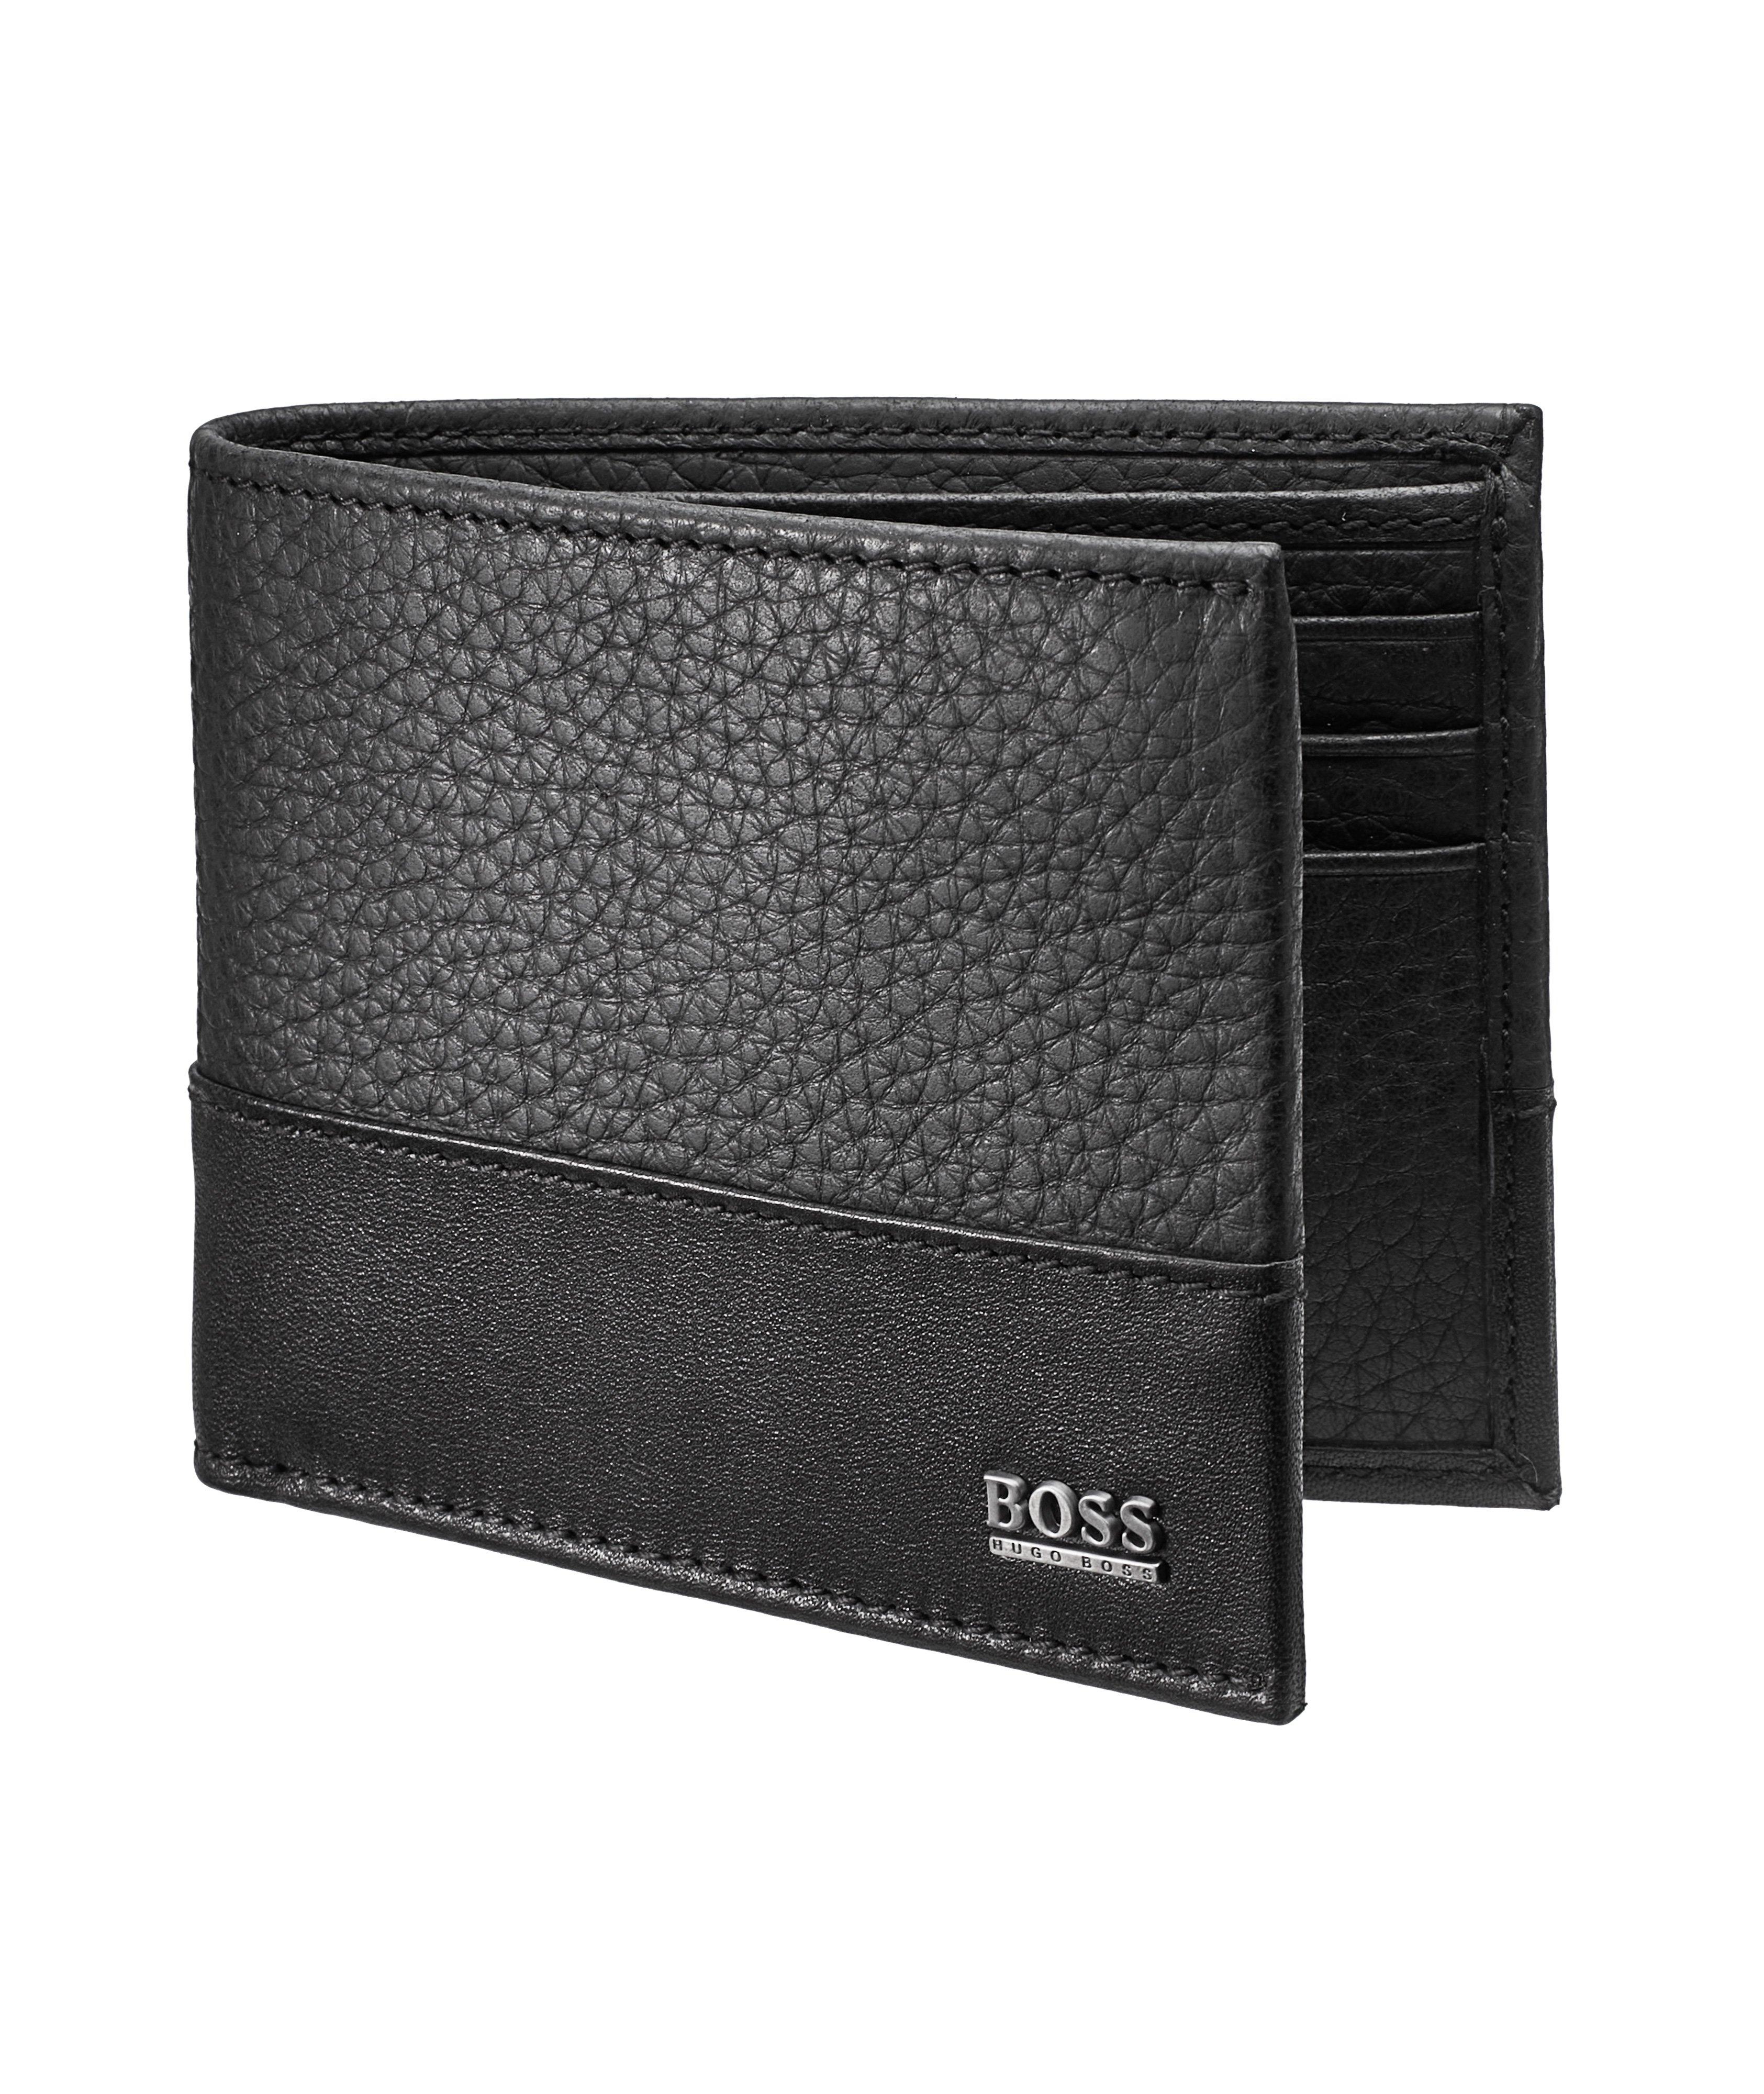 Signature Leather Bifold Wallet image 0